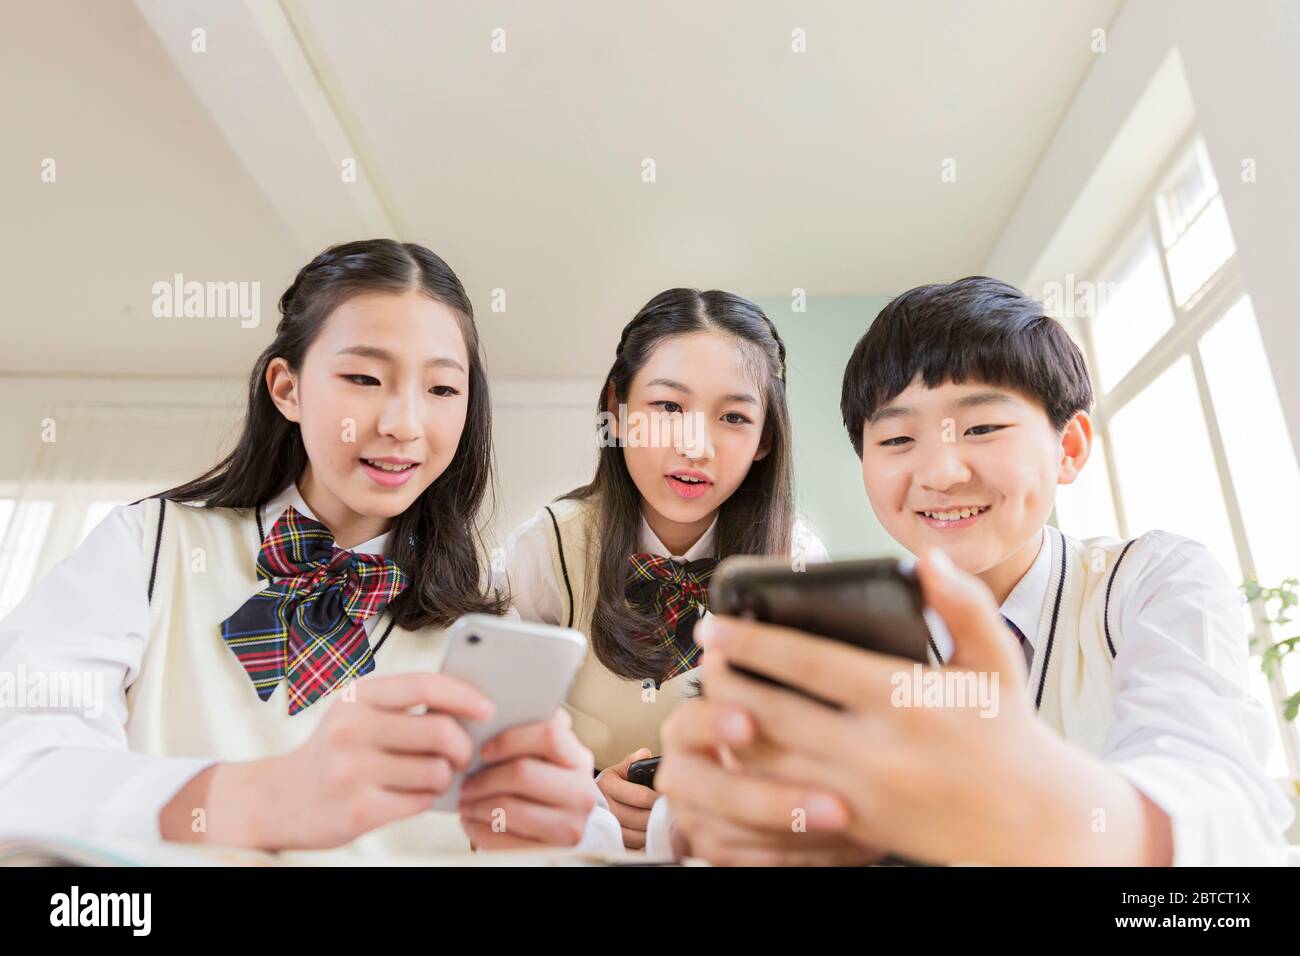 Group of school students portrait, happy smiling male and female students 302 Stock Photo